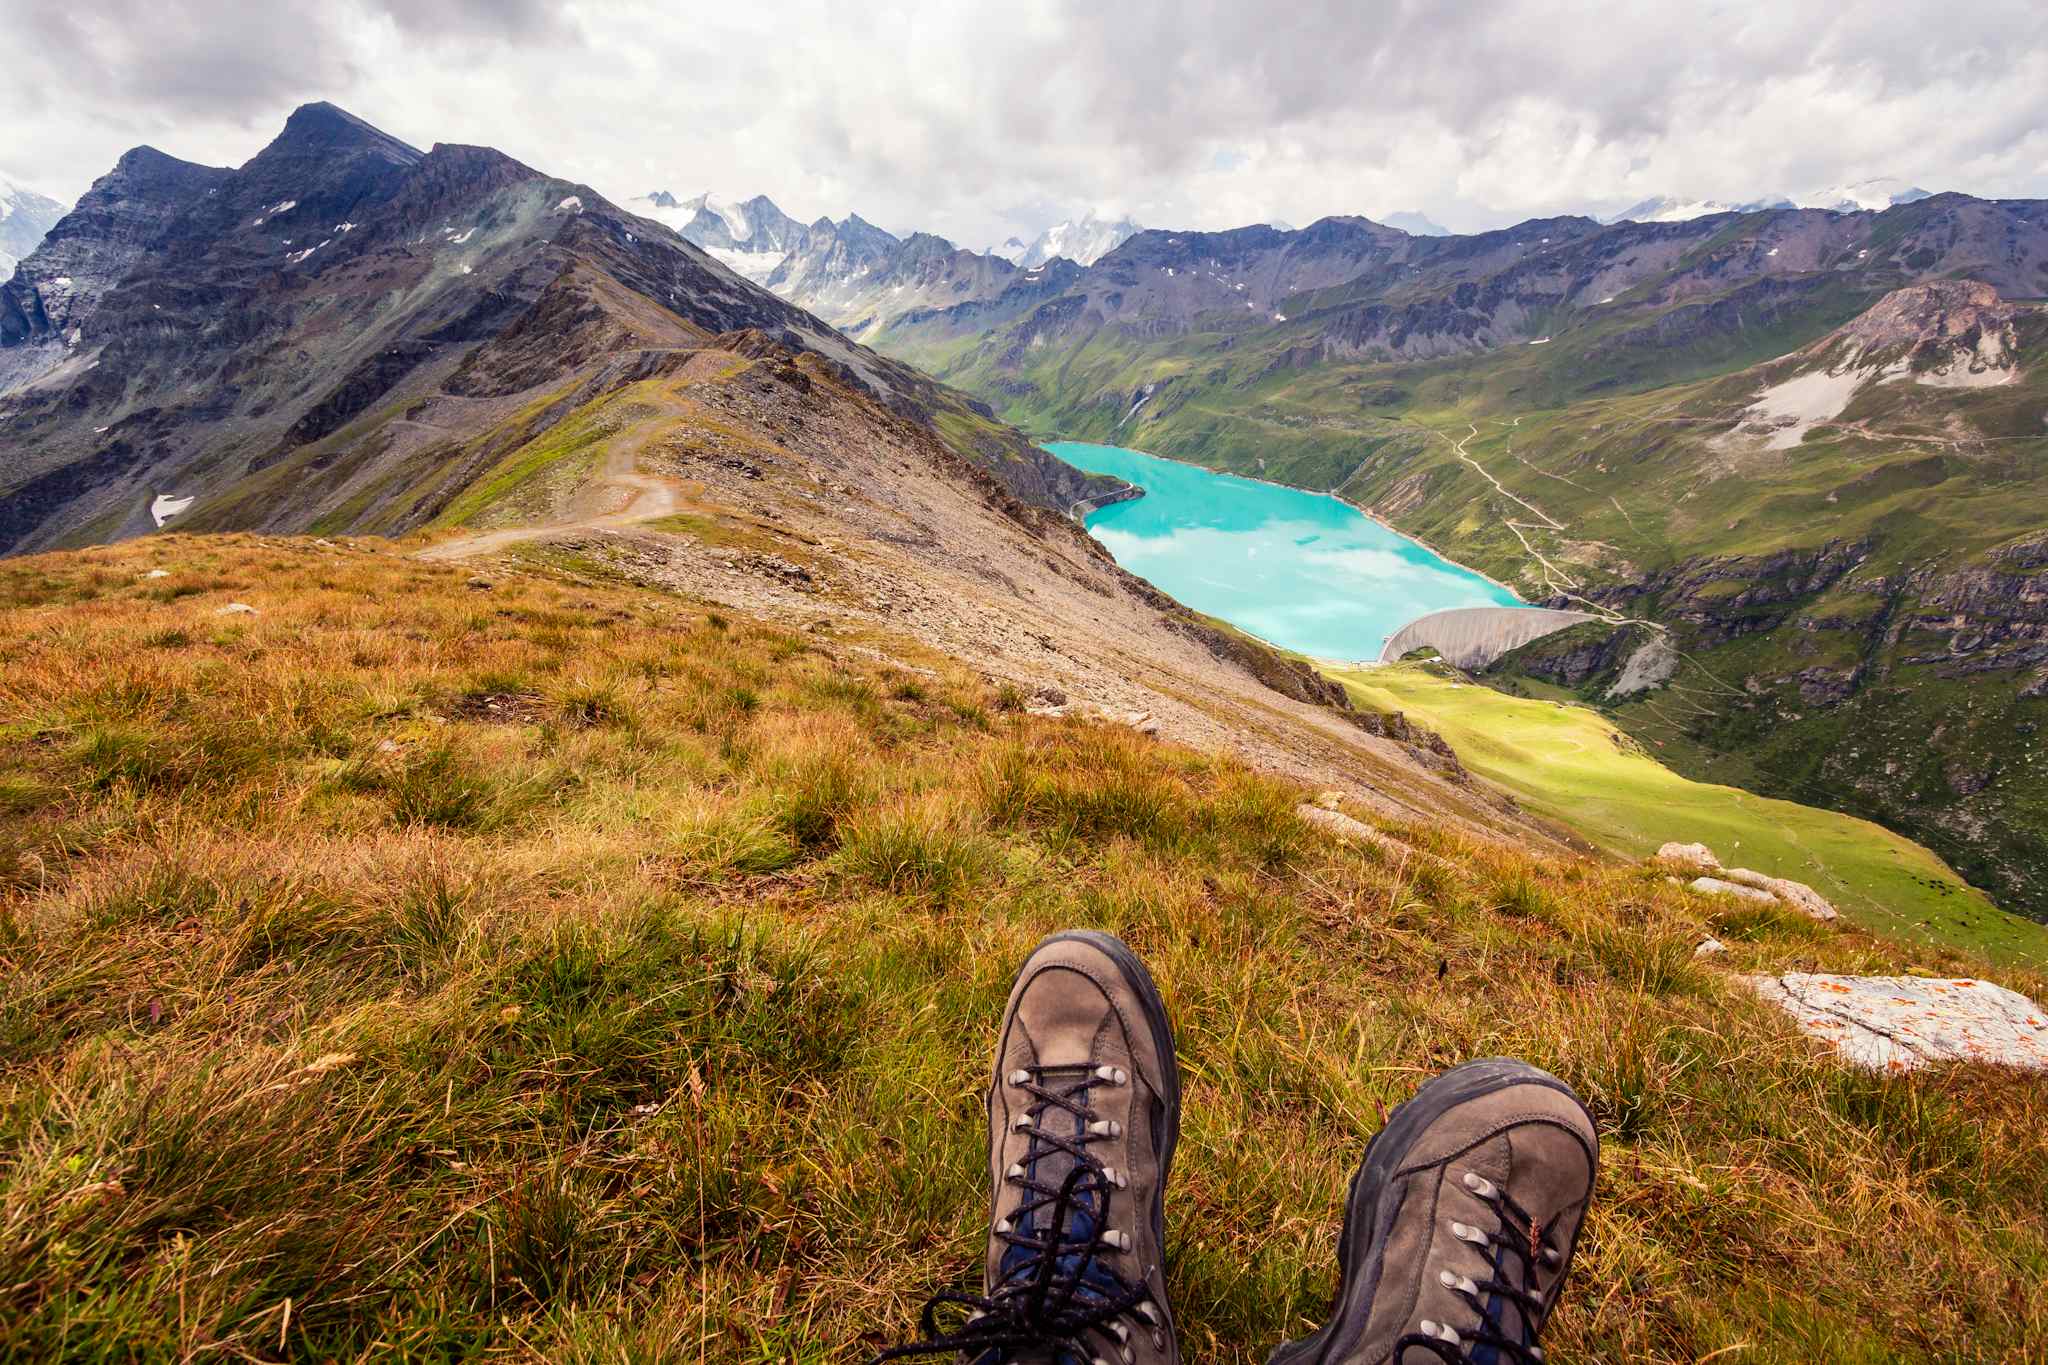 Views of Lac de Moiry on the Haute Route. Photo: Getty.